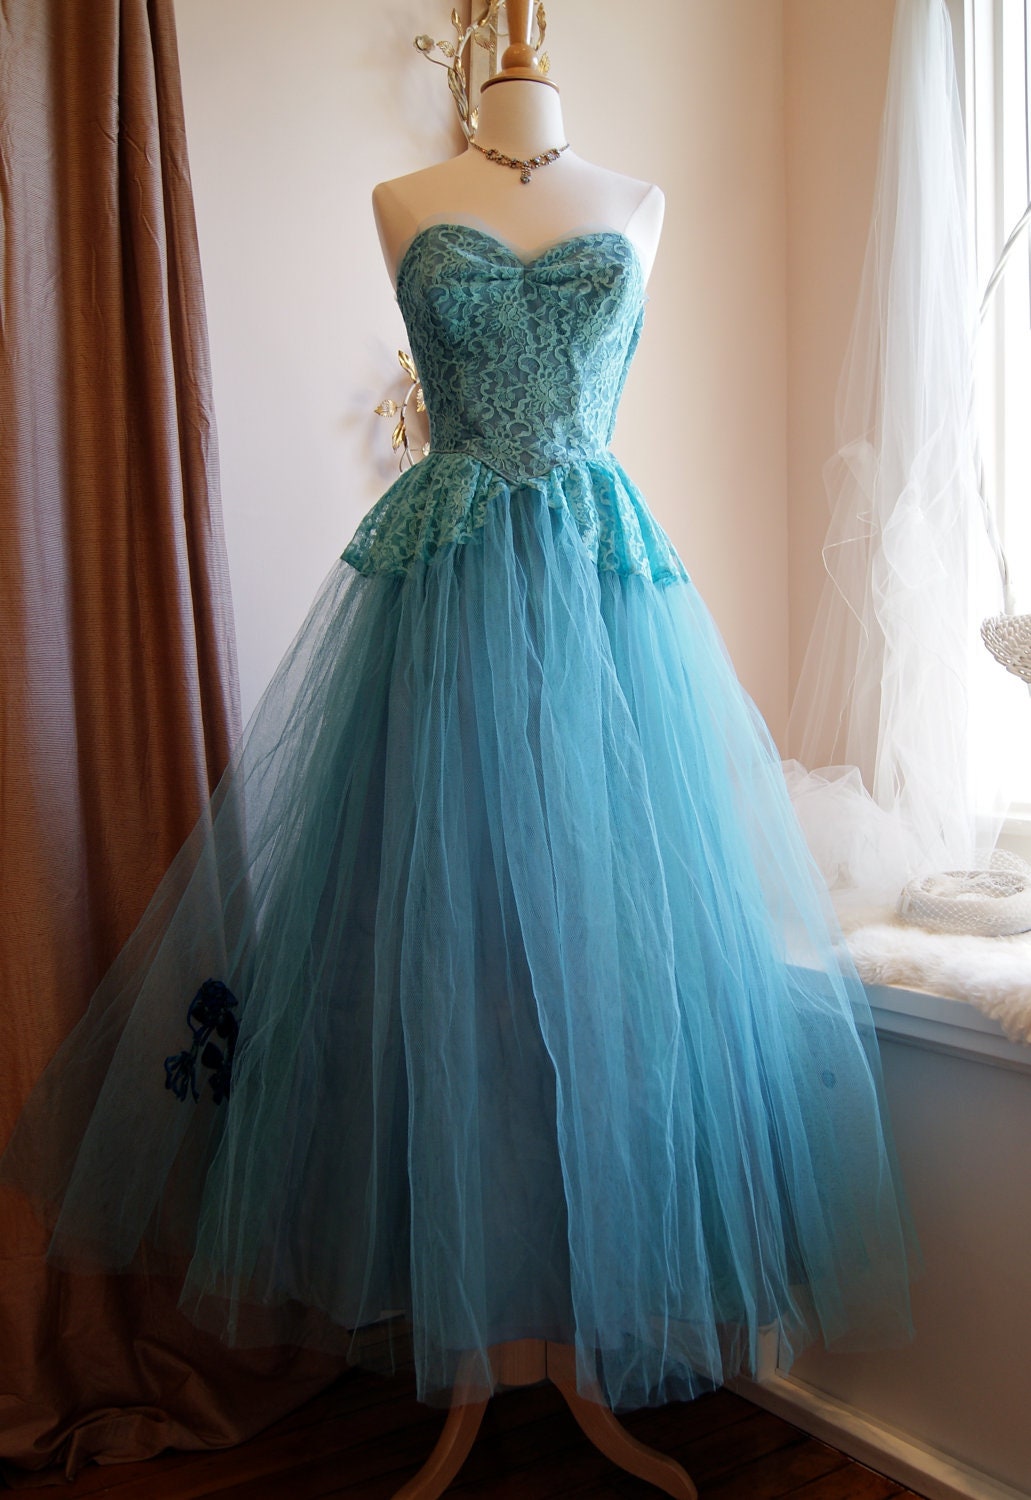 Dress  50s Prom Dress  Vintage 1950s Peacock Blue Party Prom Dress ...